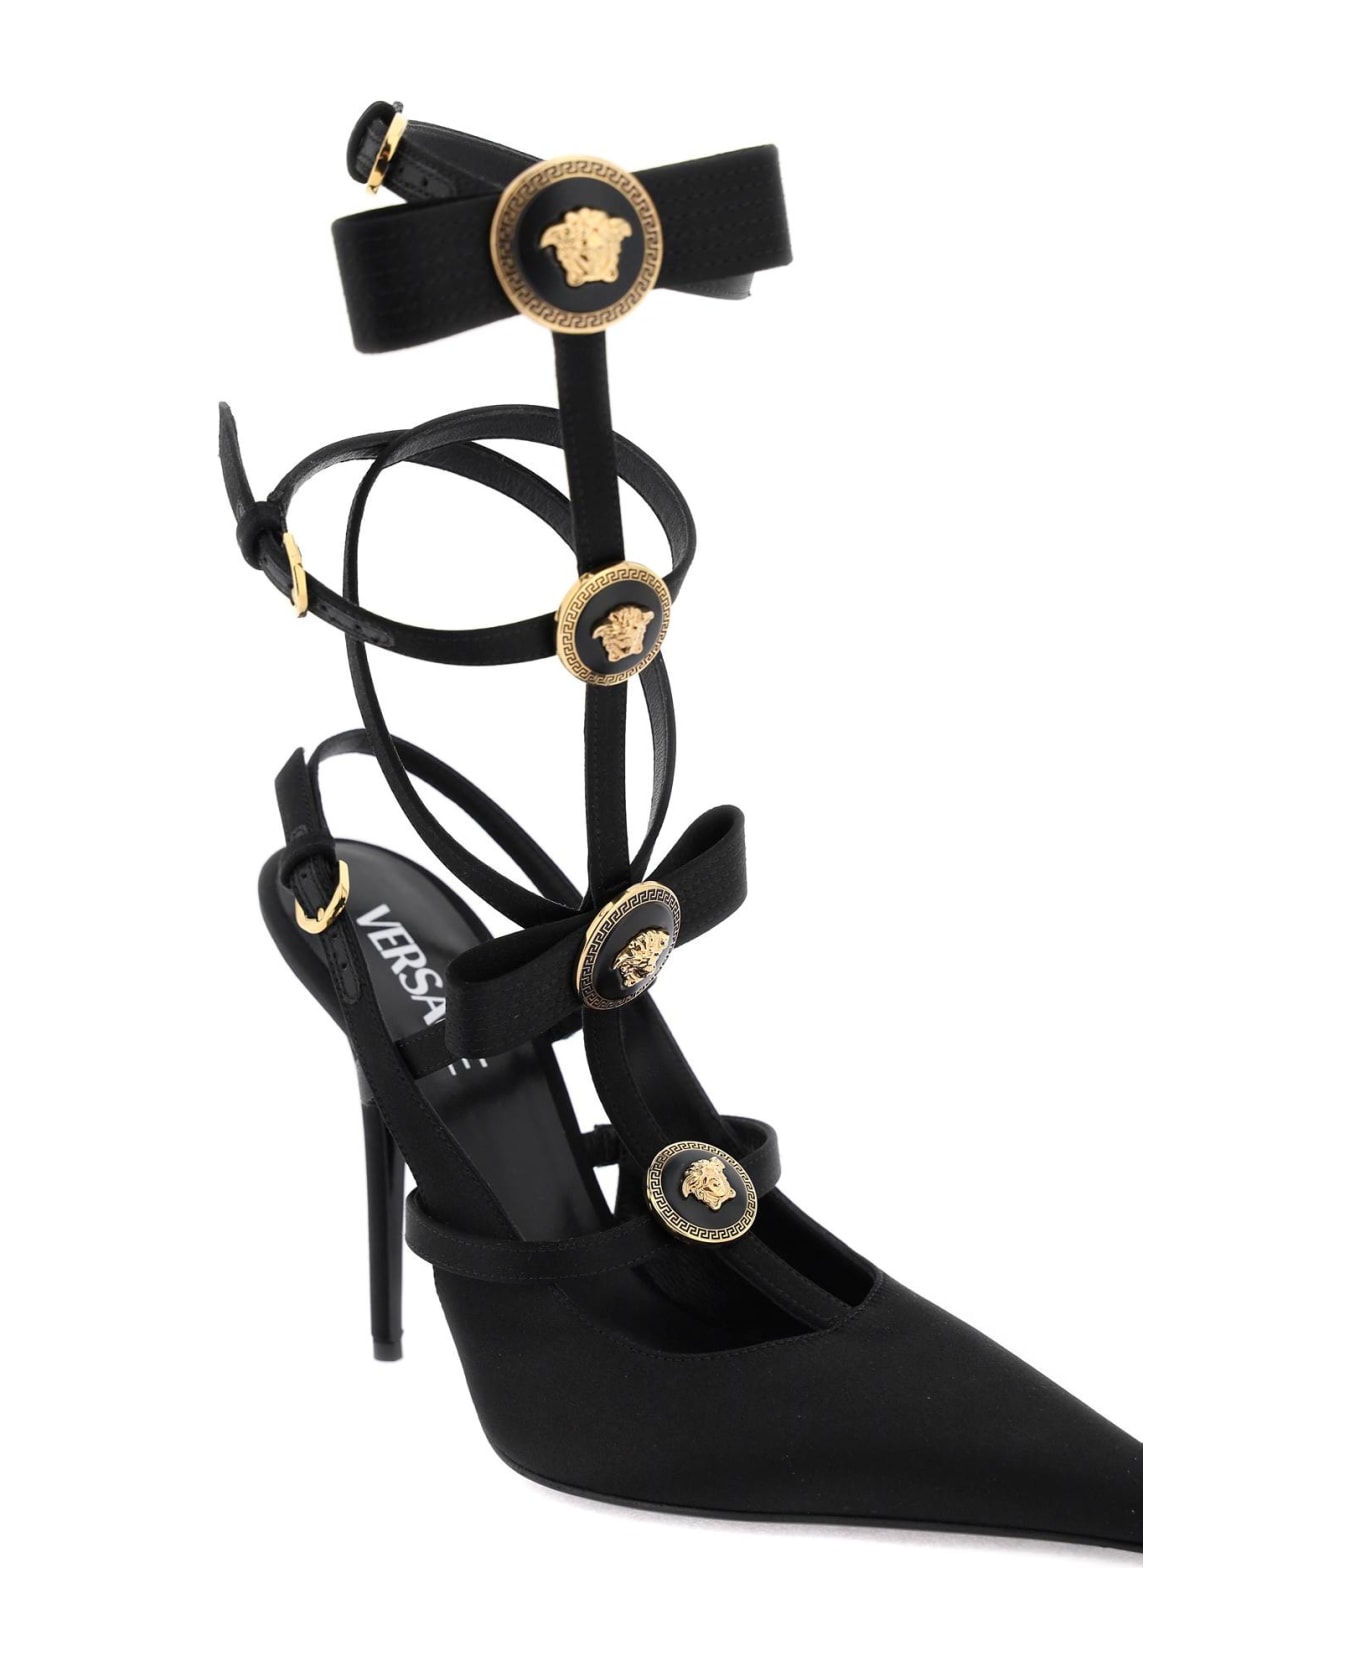 Versace Slingback Pumps With Gianni Ribbon Bows - BLACK VERSACE GOLD (Black) ハイヒール